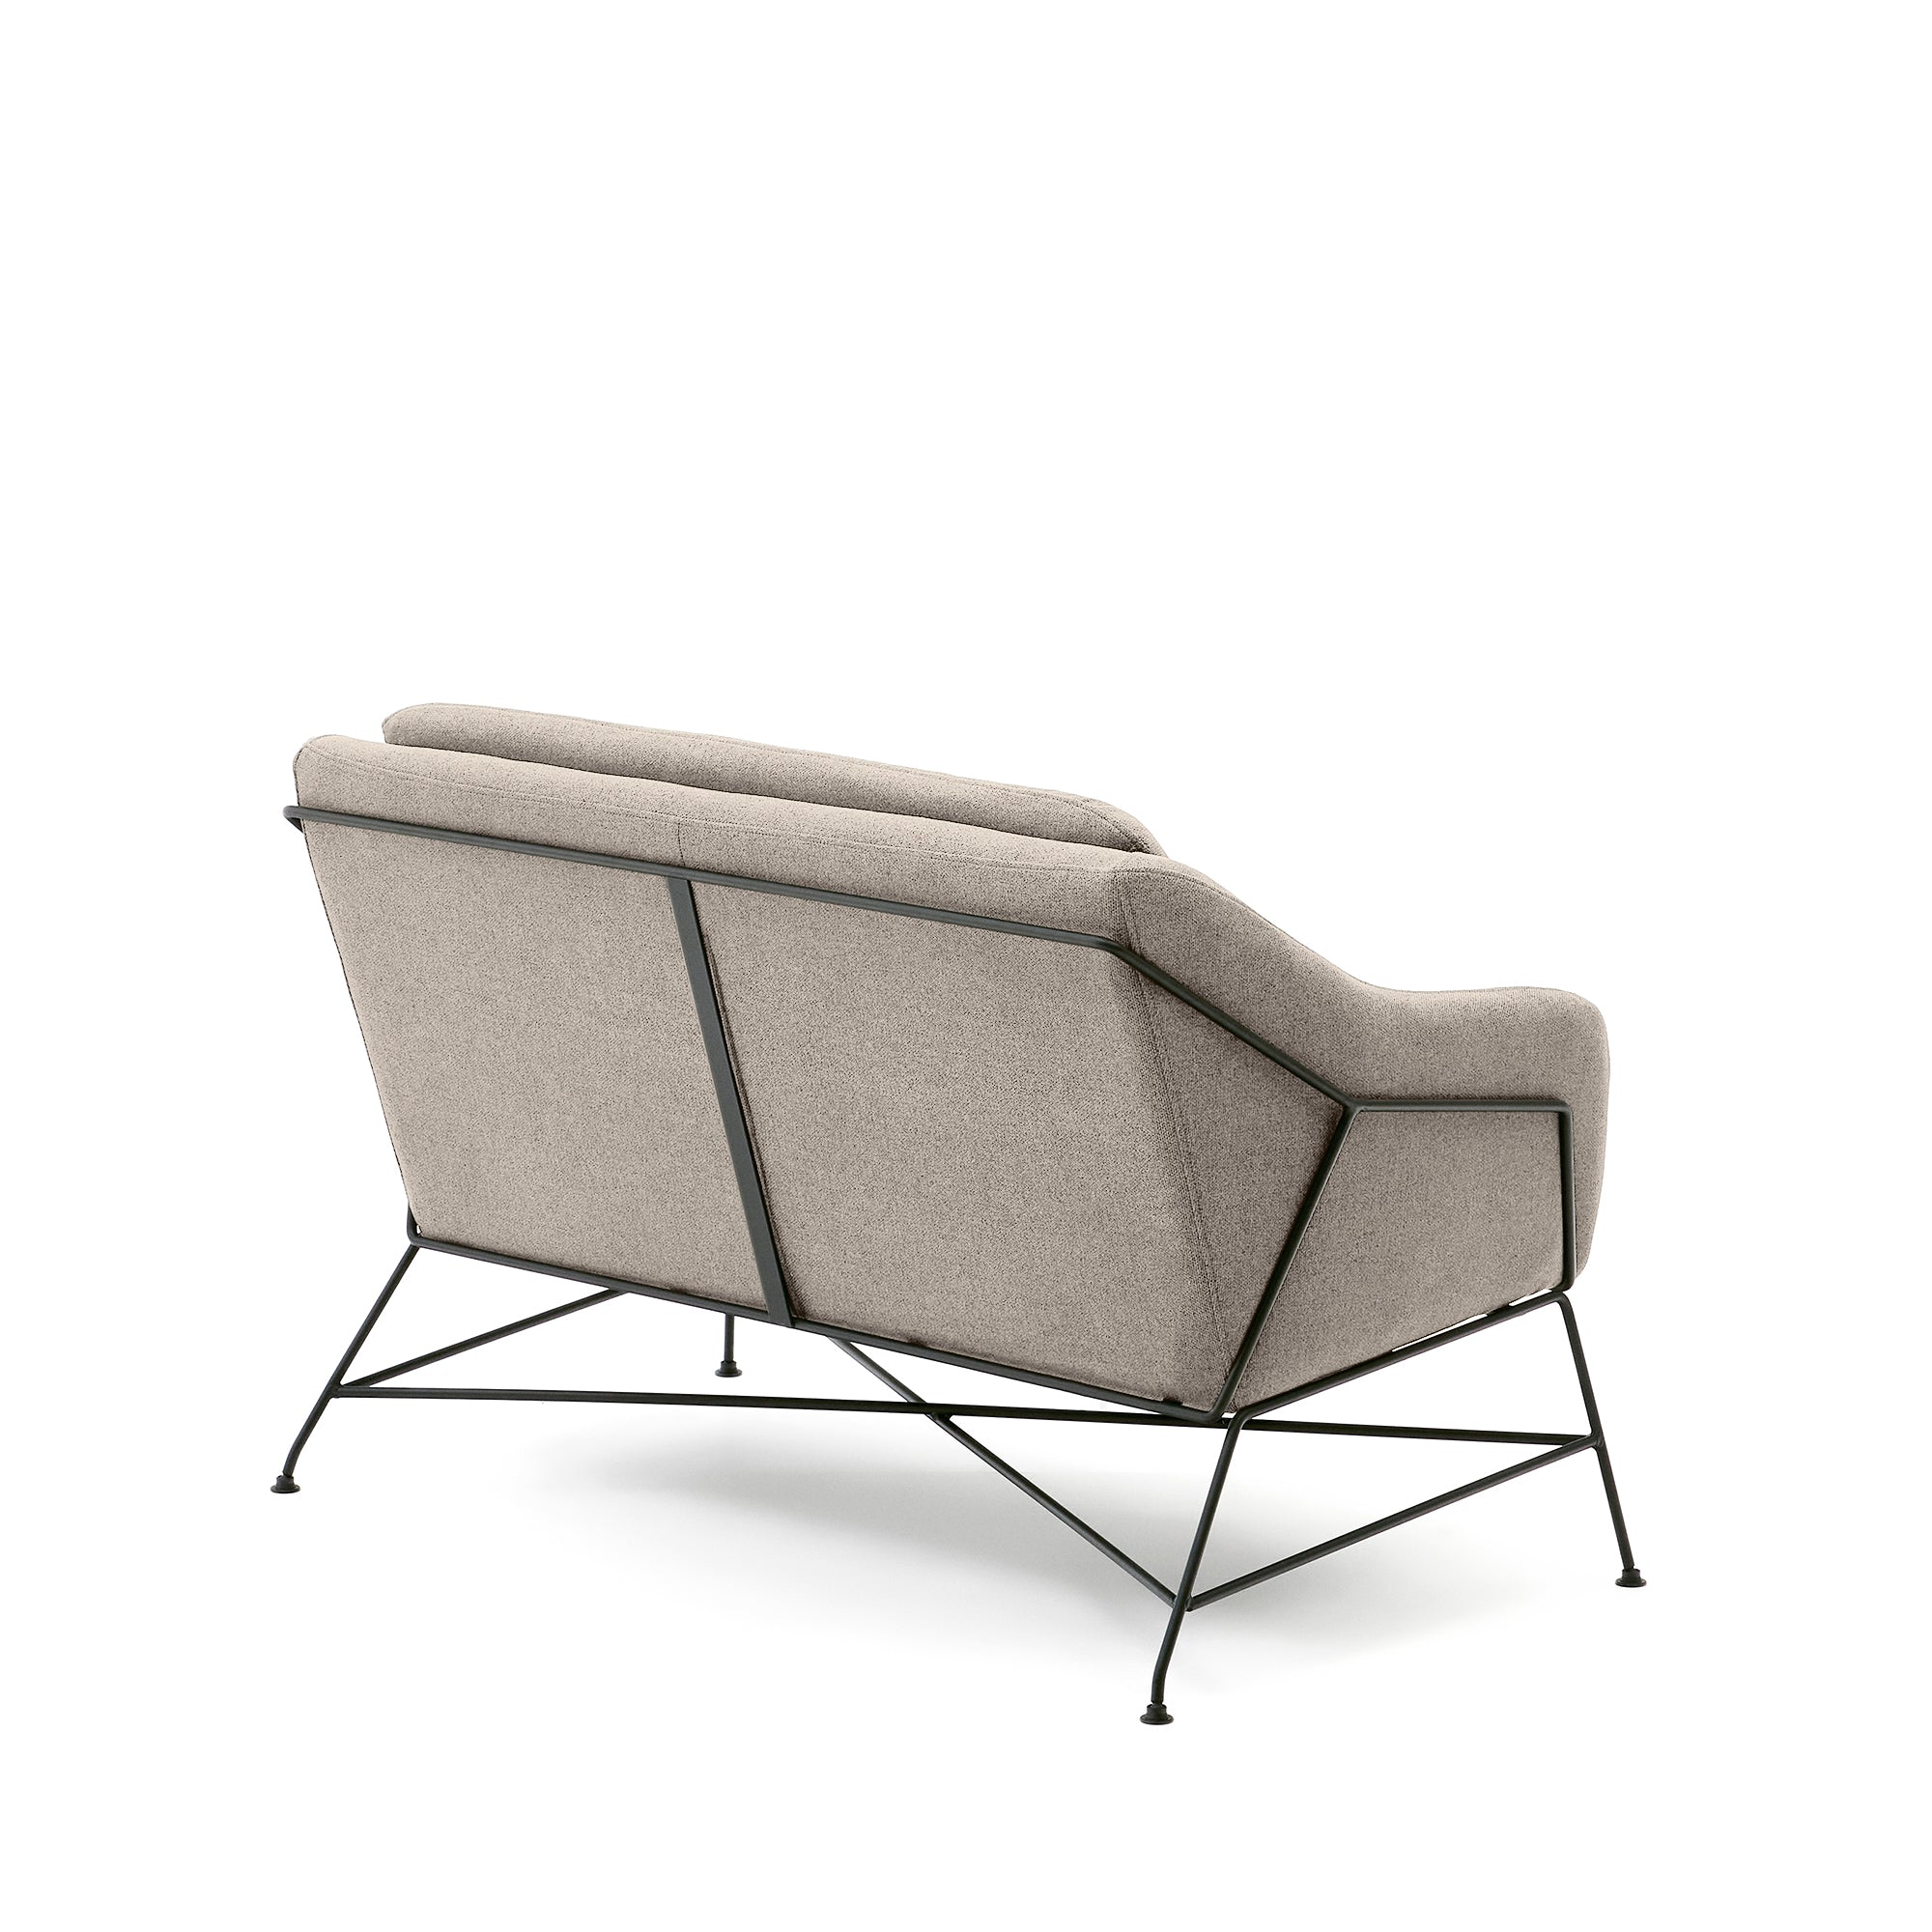 Brida 2-seater sofa in beige and steel legs with black finish, 128 cm